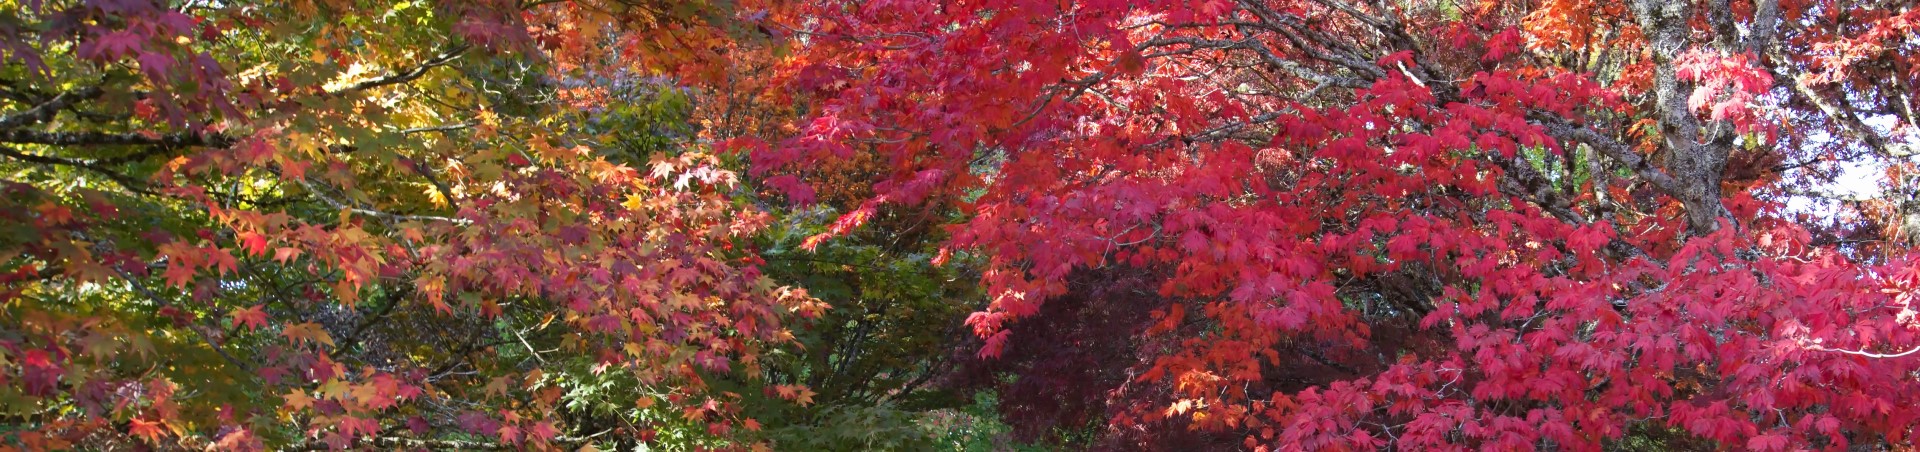 FULL-Magnificent Maples and Their Colors